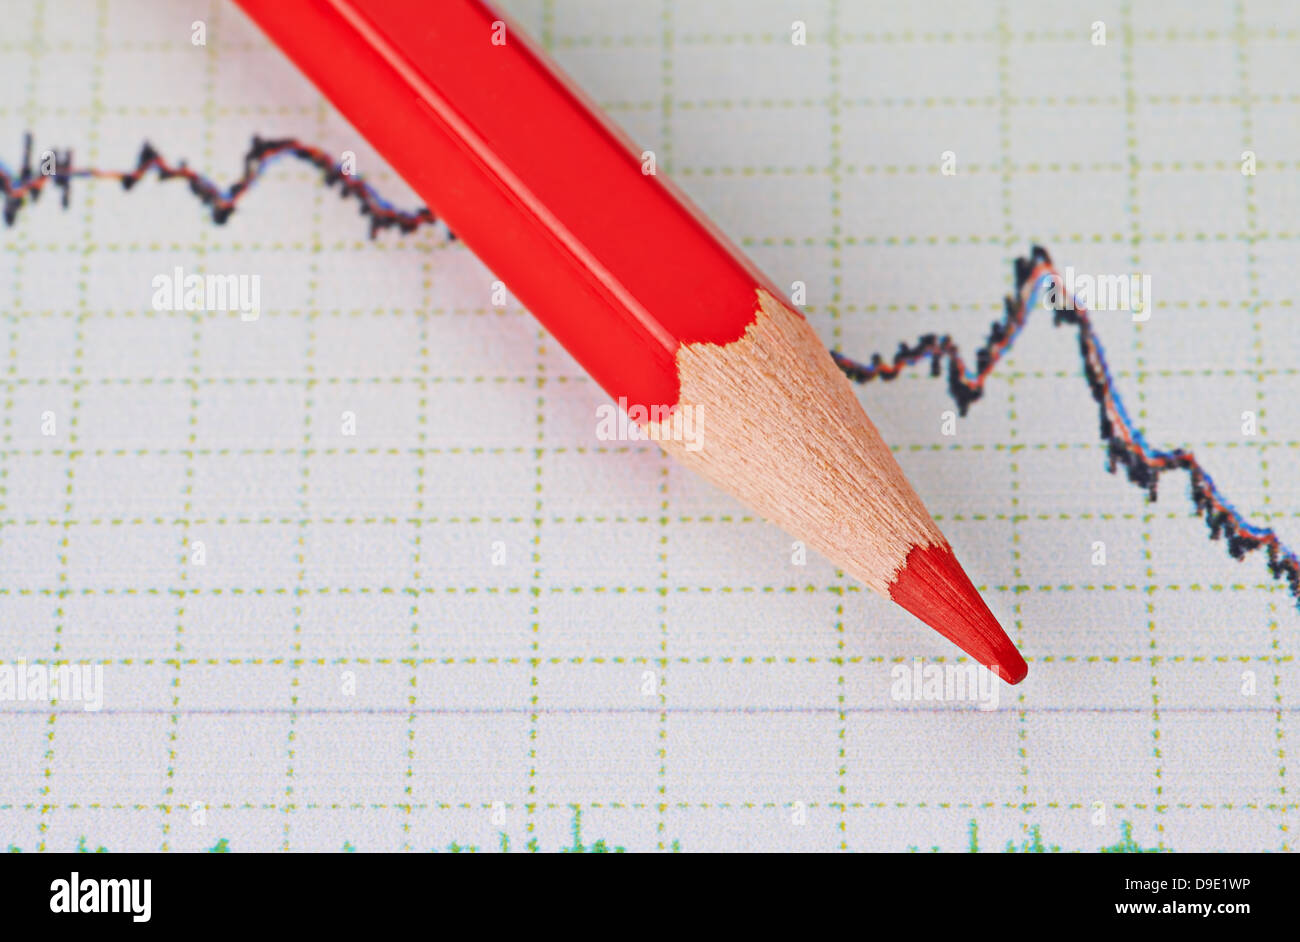 Financial downtrend chart and red pencil. Selective focus Stock Photo